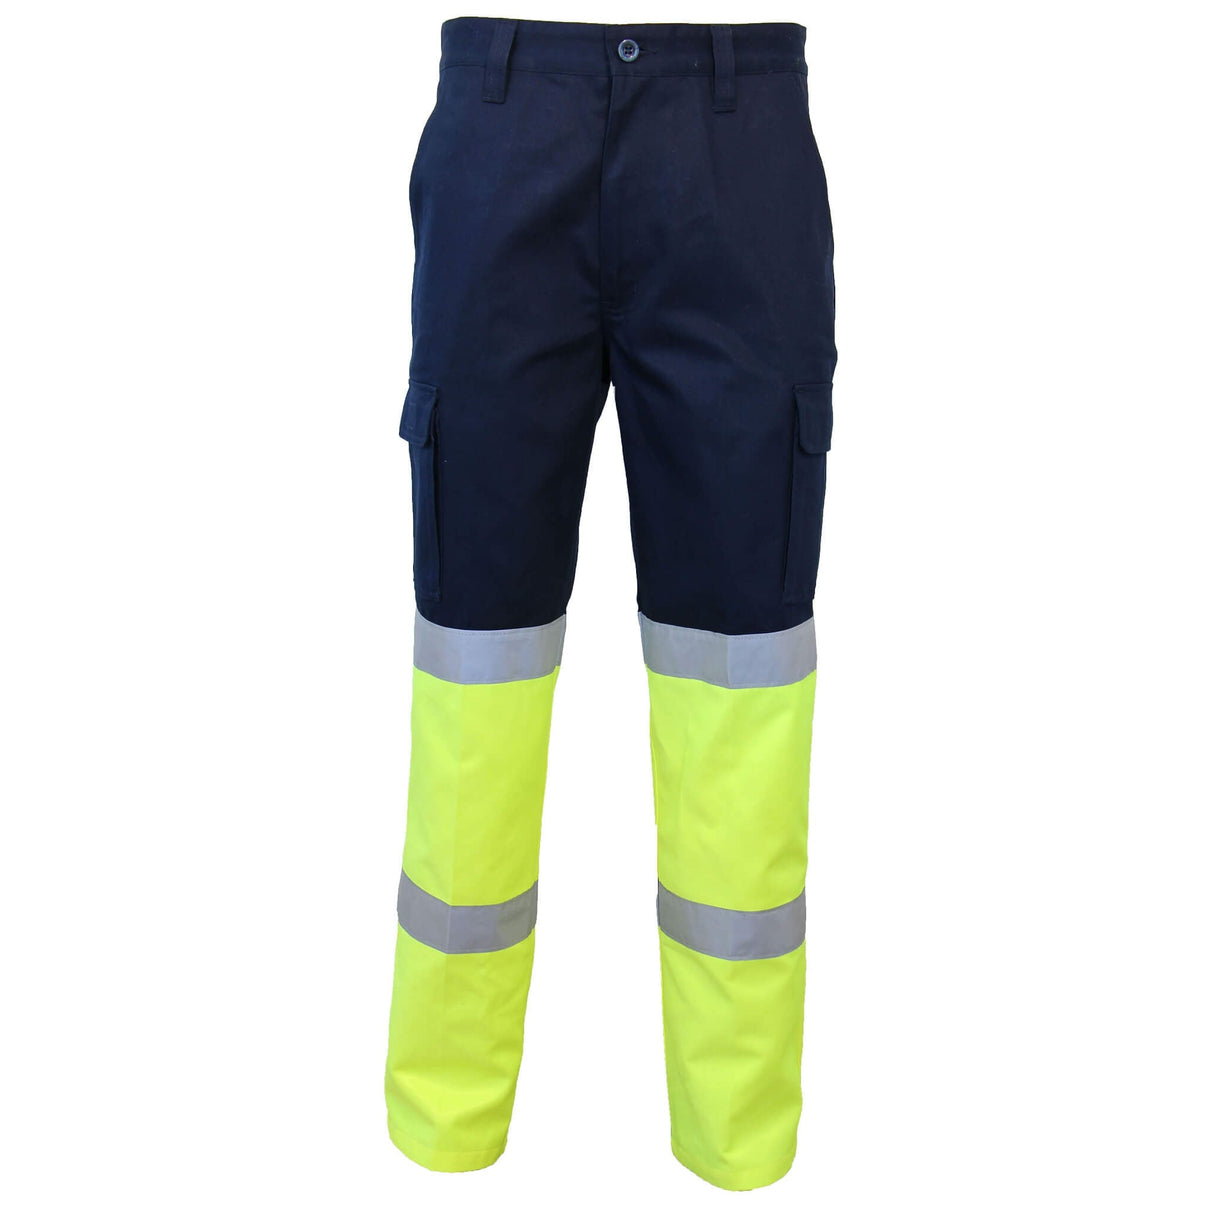 3363 Two Tone Biomotion Tape Cargo Pants